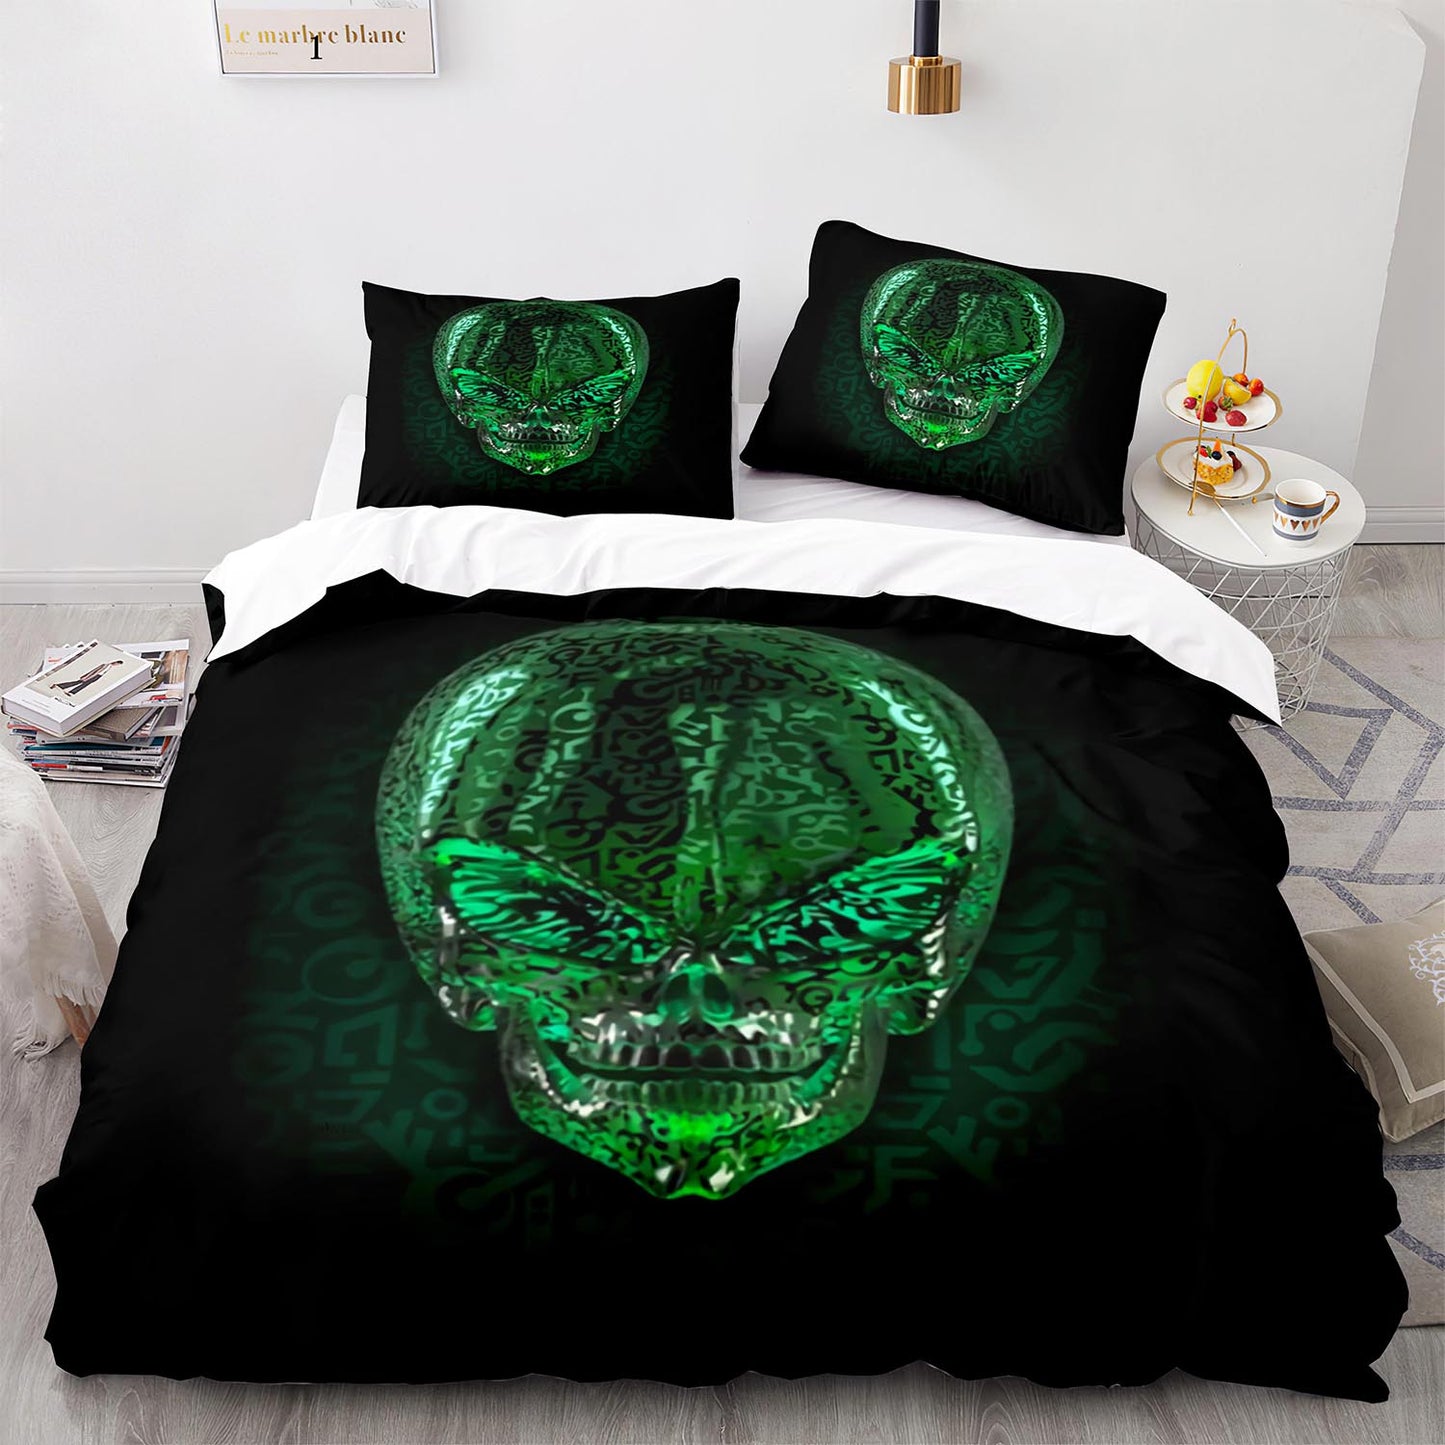 Cutom Duvet Cover Set Pattern Chic Comforter Cover King Size for Teens Adults Bedding Set with Pillowcases  WXR1023